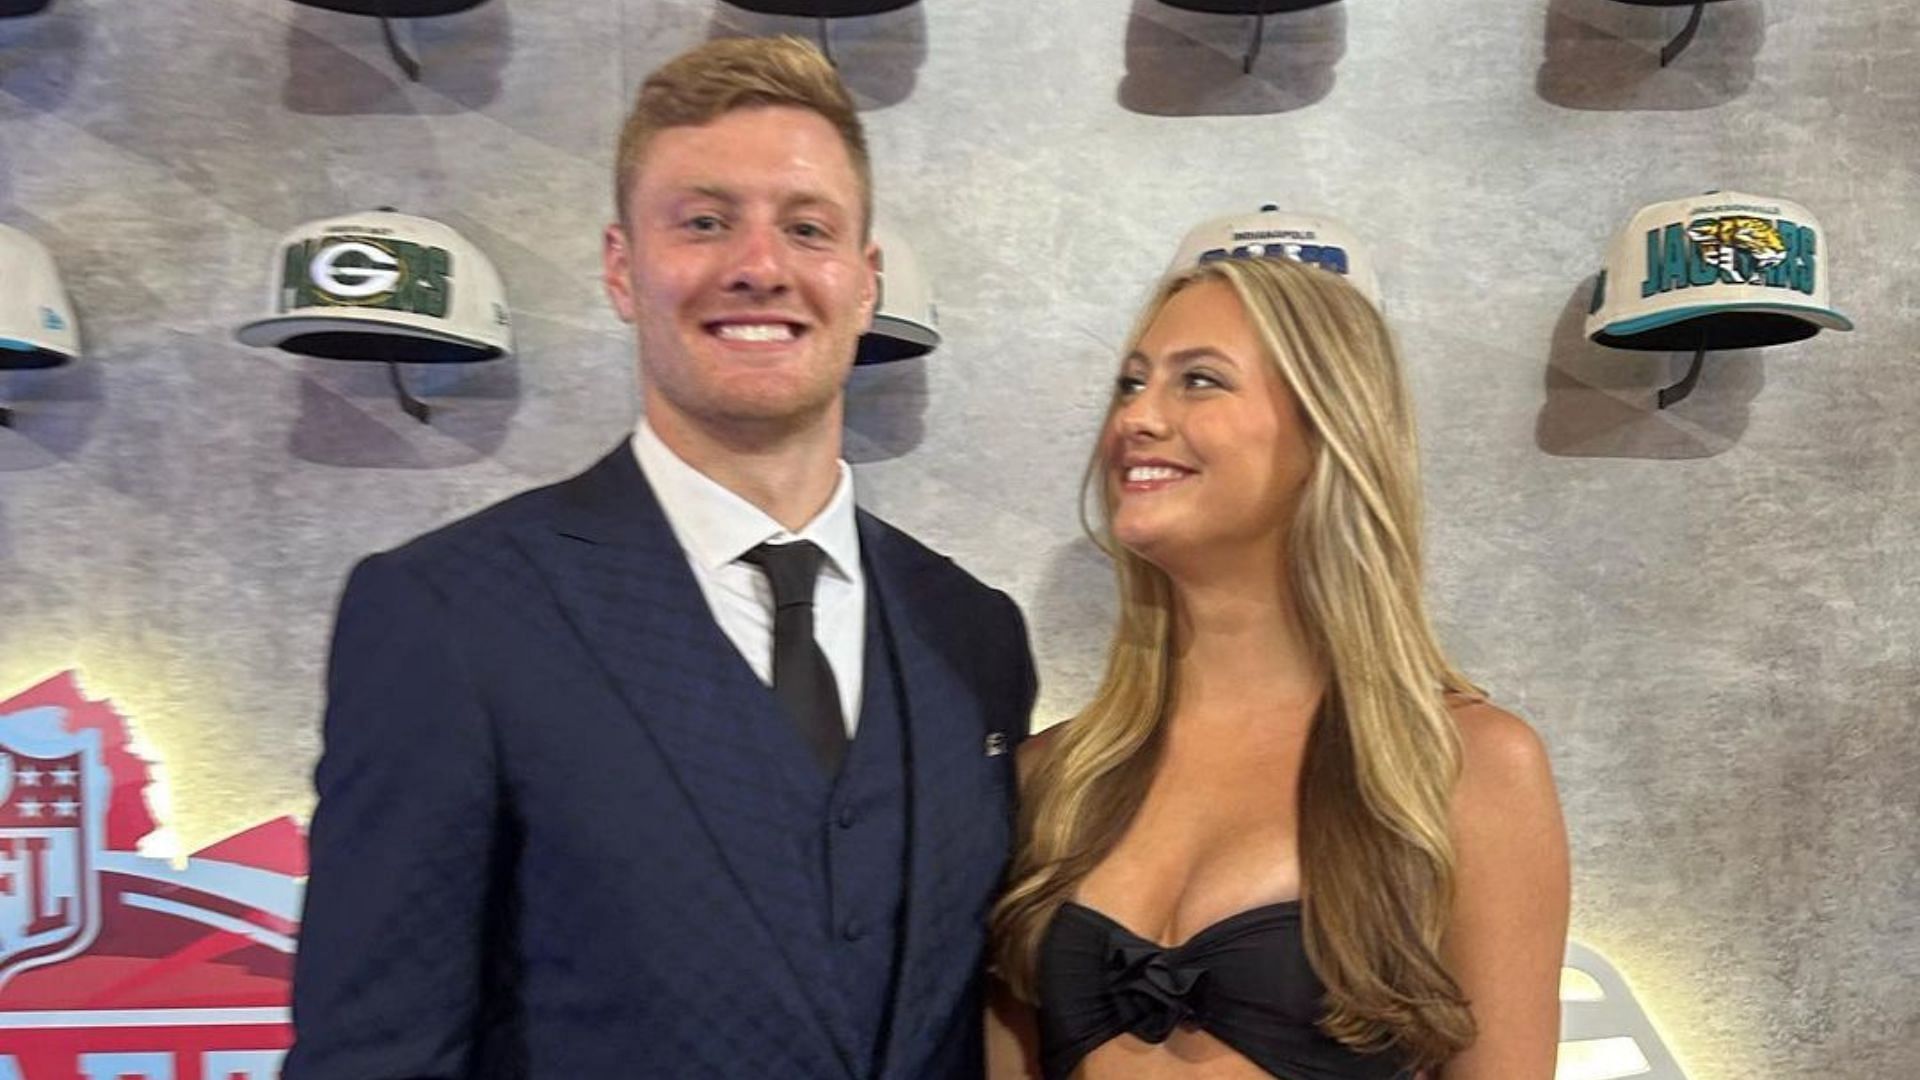 Will and Kelley Levis at the 2023 NFL Draft. (Image credit: Instagram.com/kelleylevis)